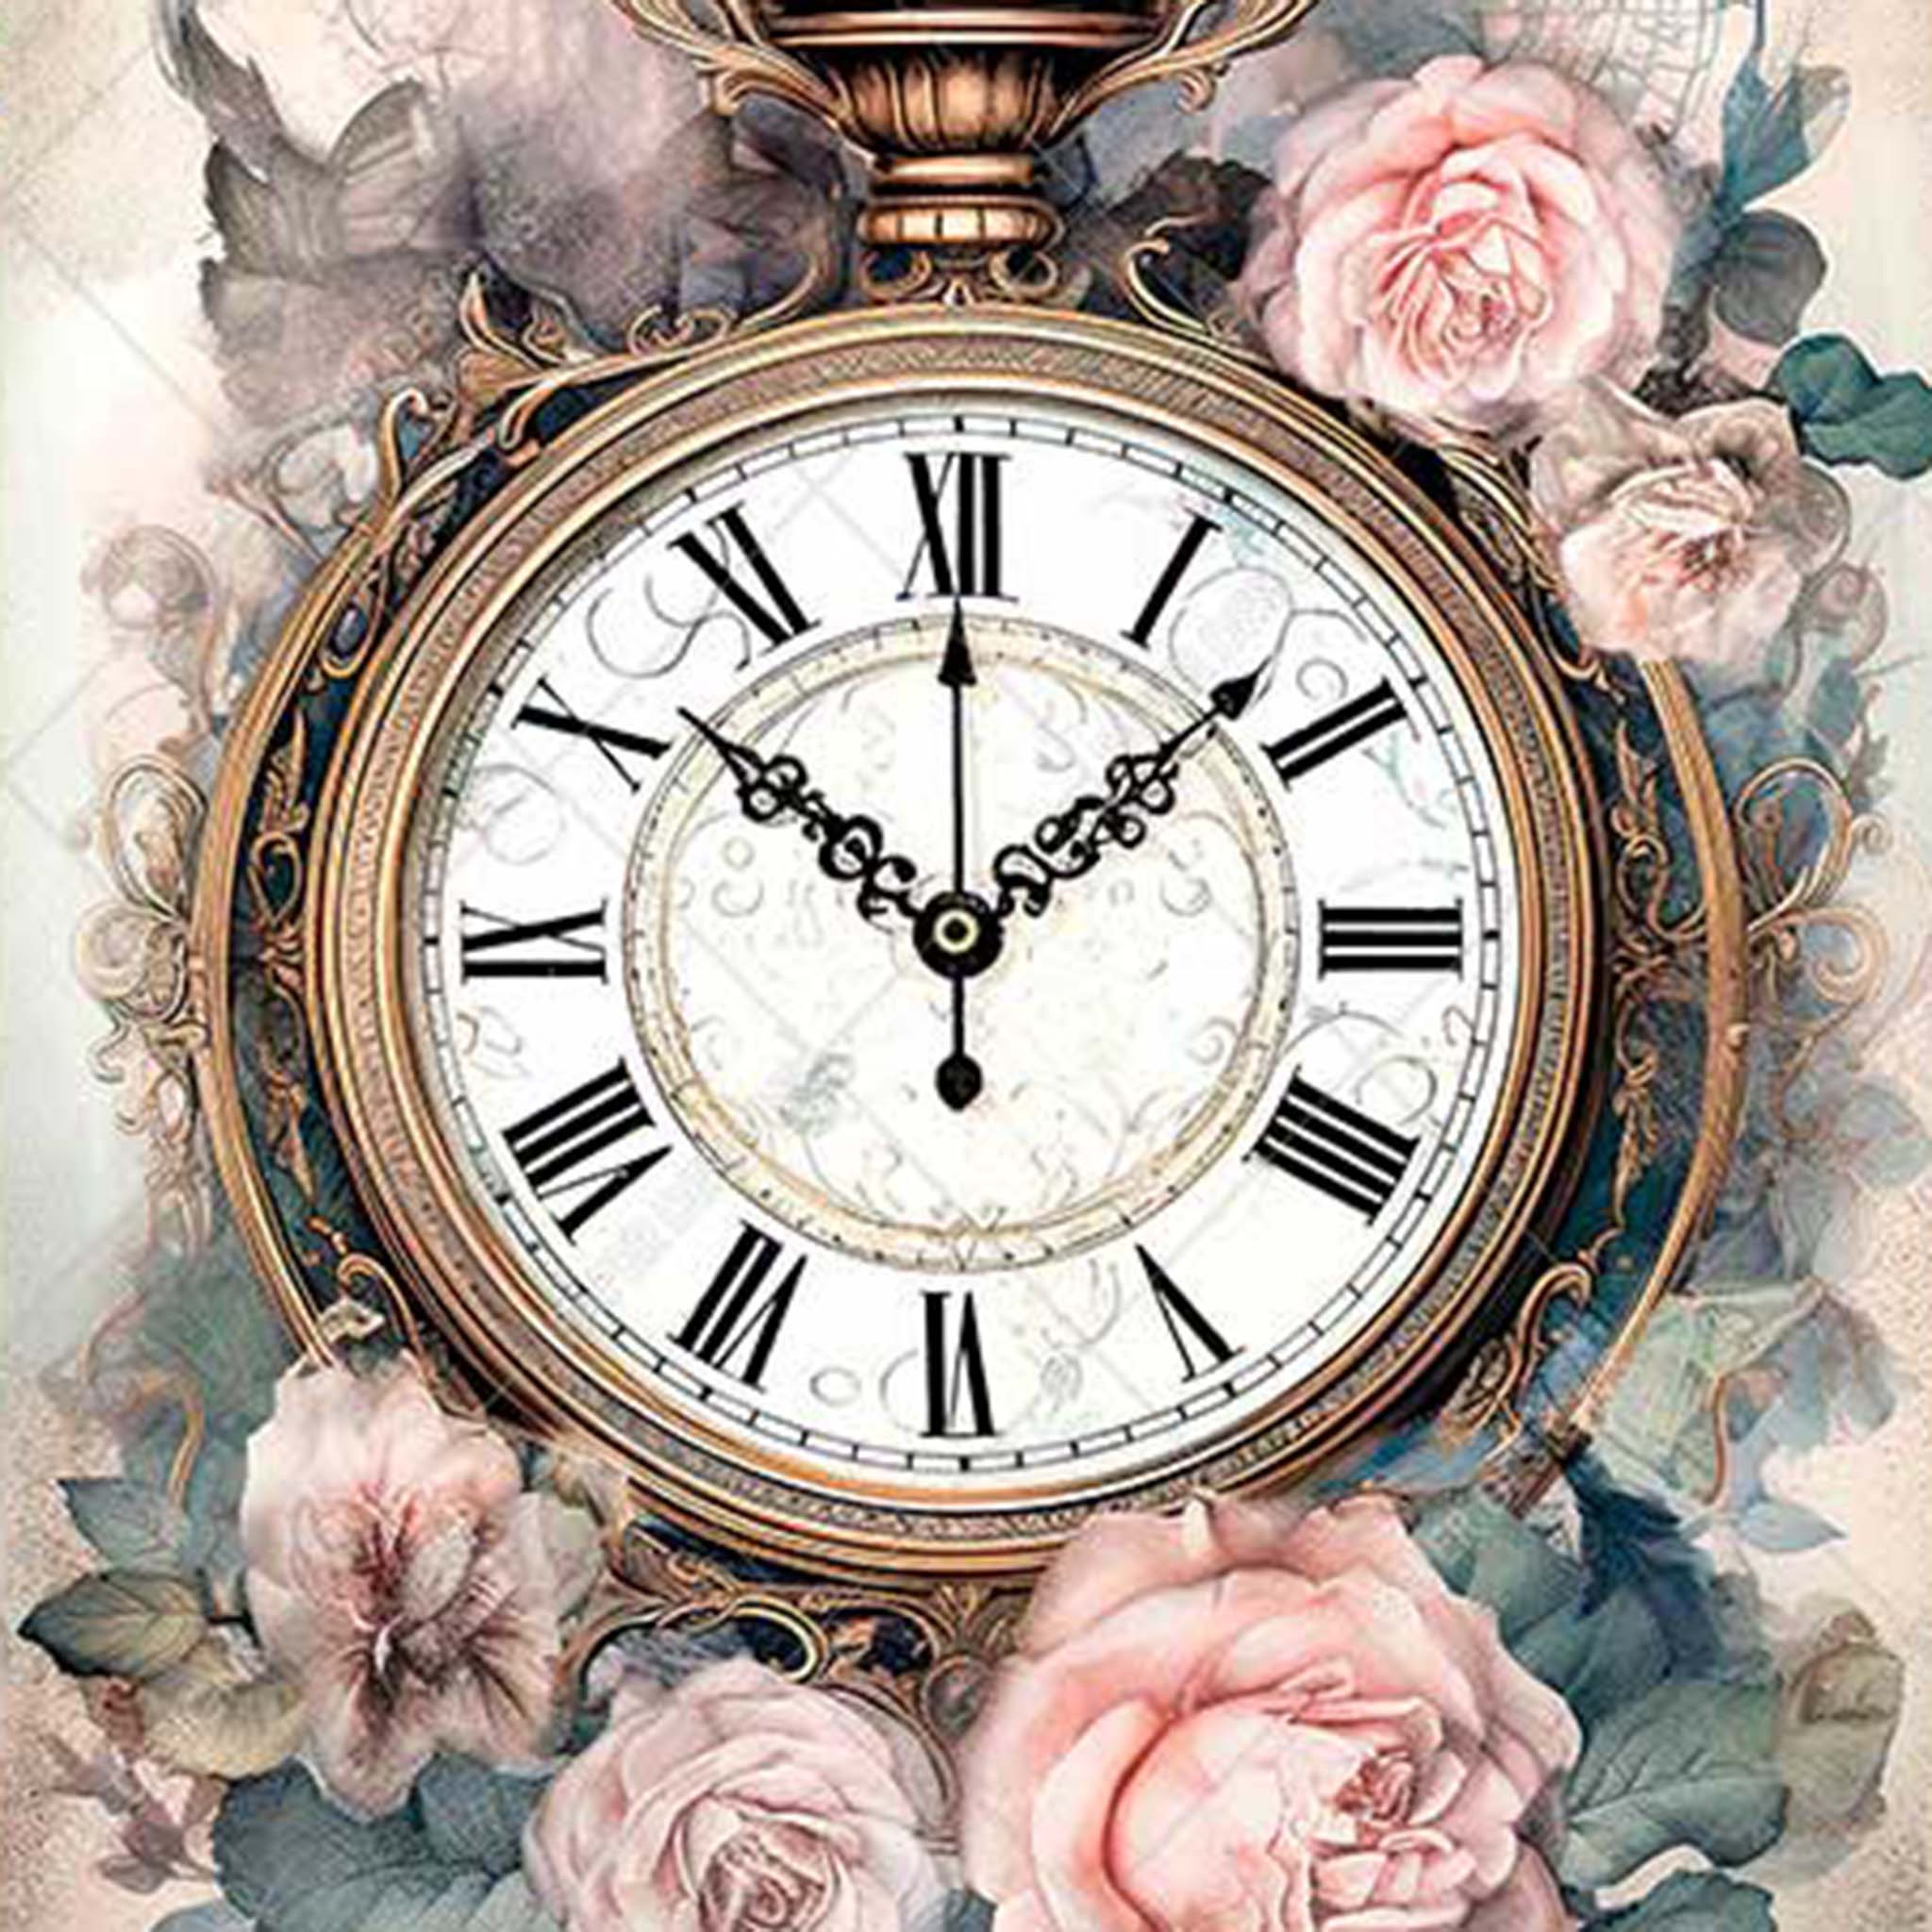 A3 rice paper design that features a classic pocket watch surrounded by elegant pink roses. 